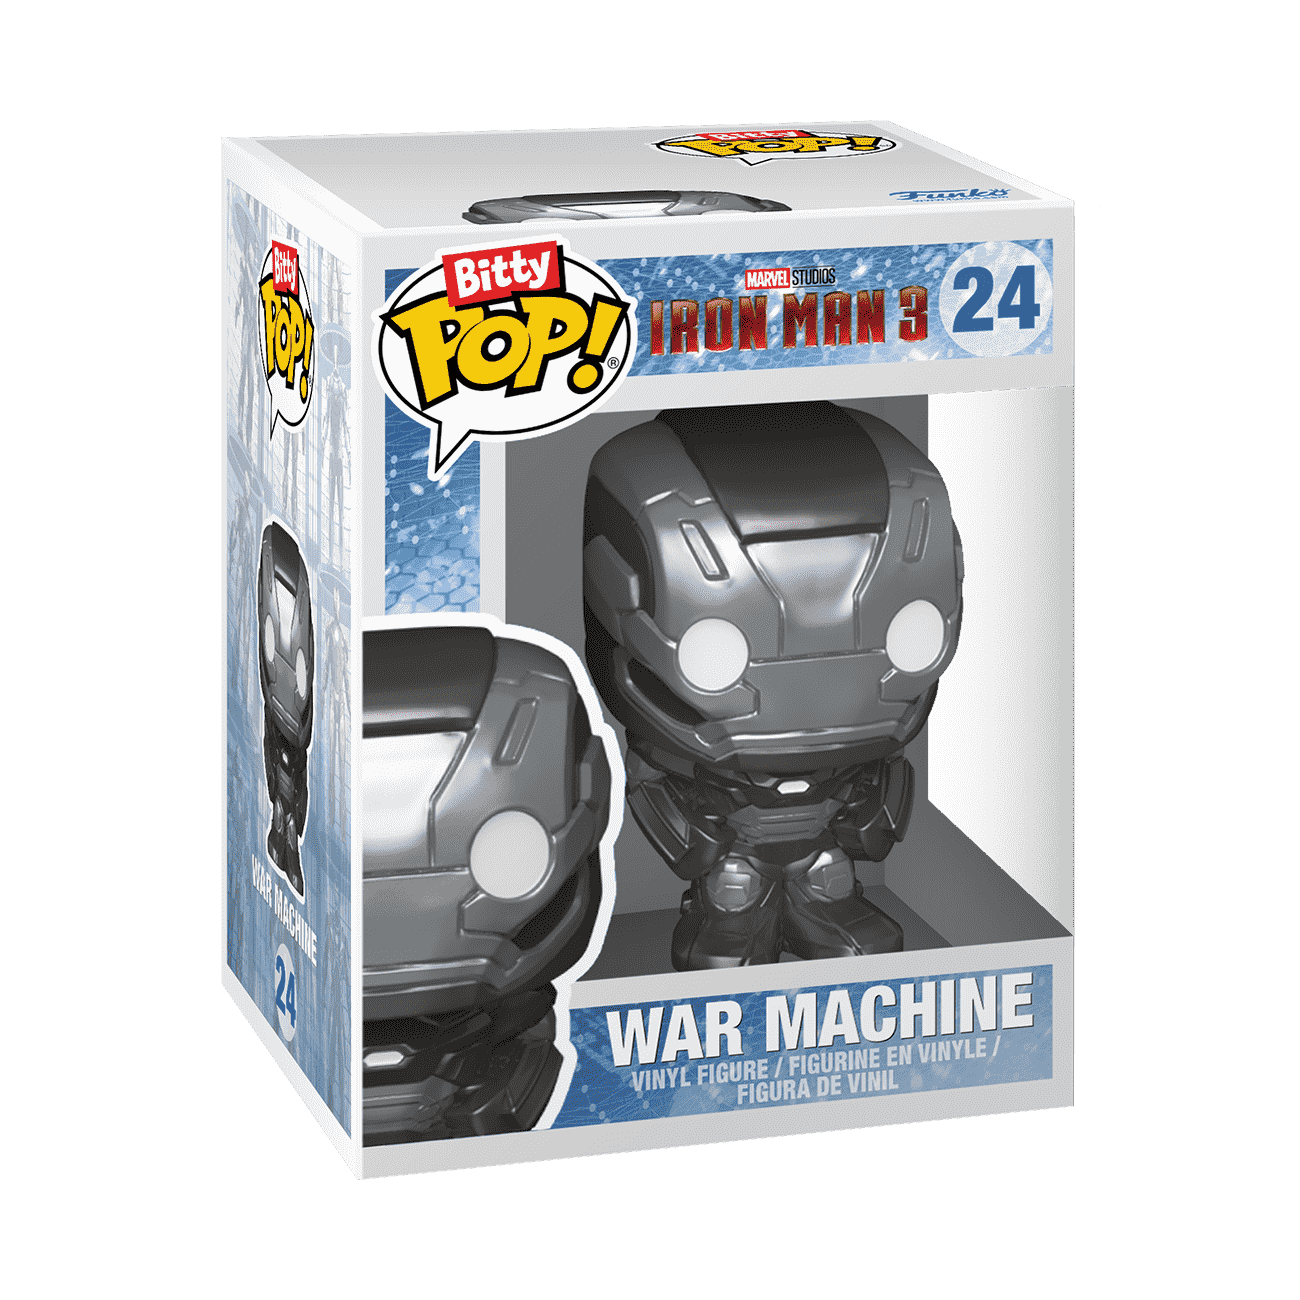 Funko Bitty Pop! Marvel The Infinity Saga Collection, Pick your